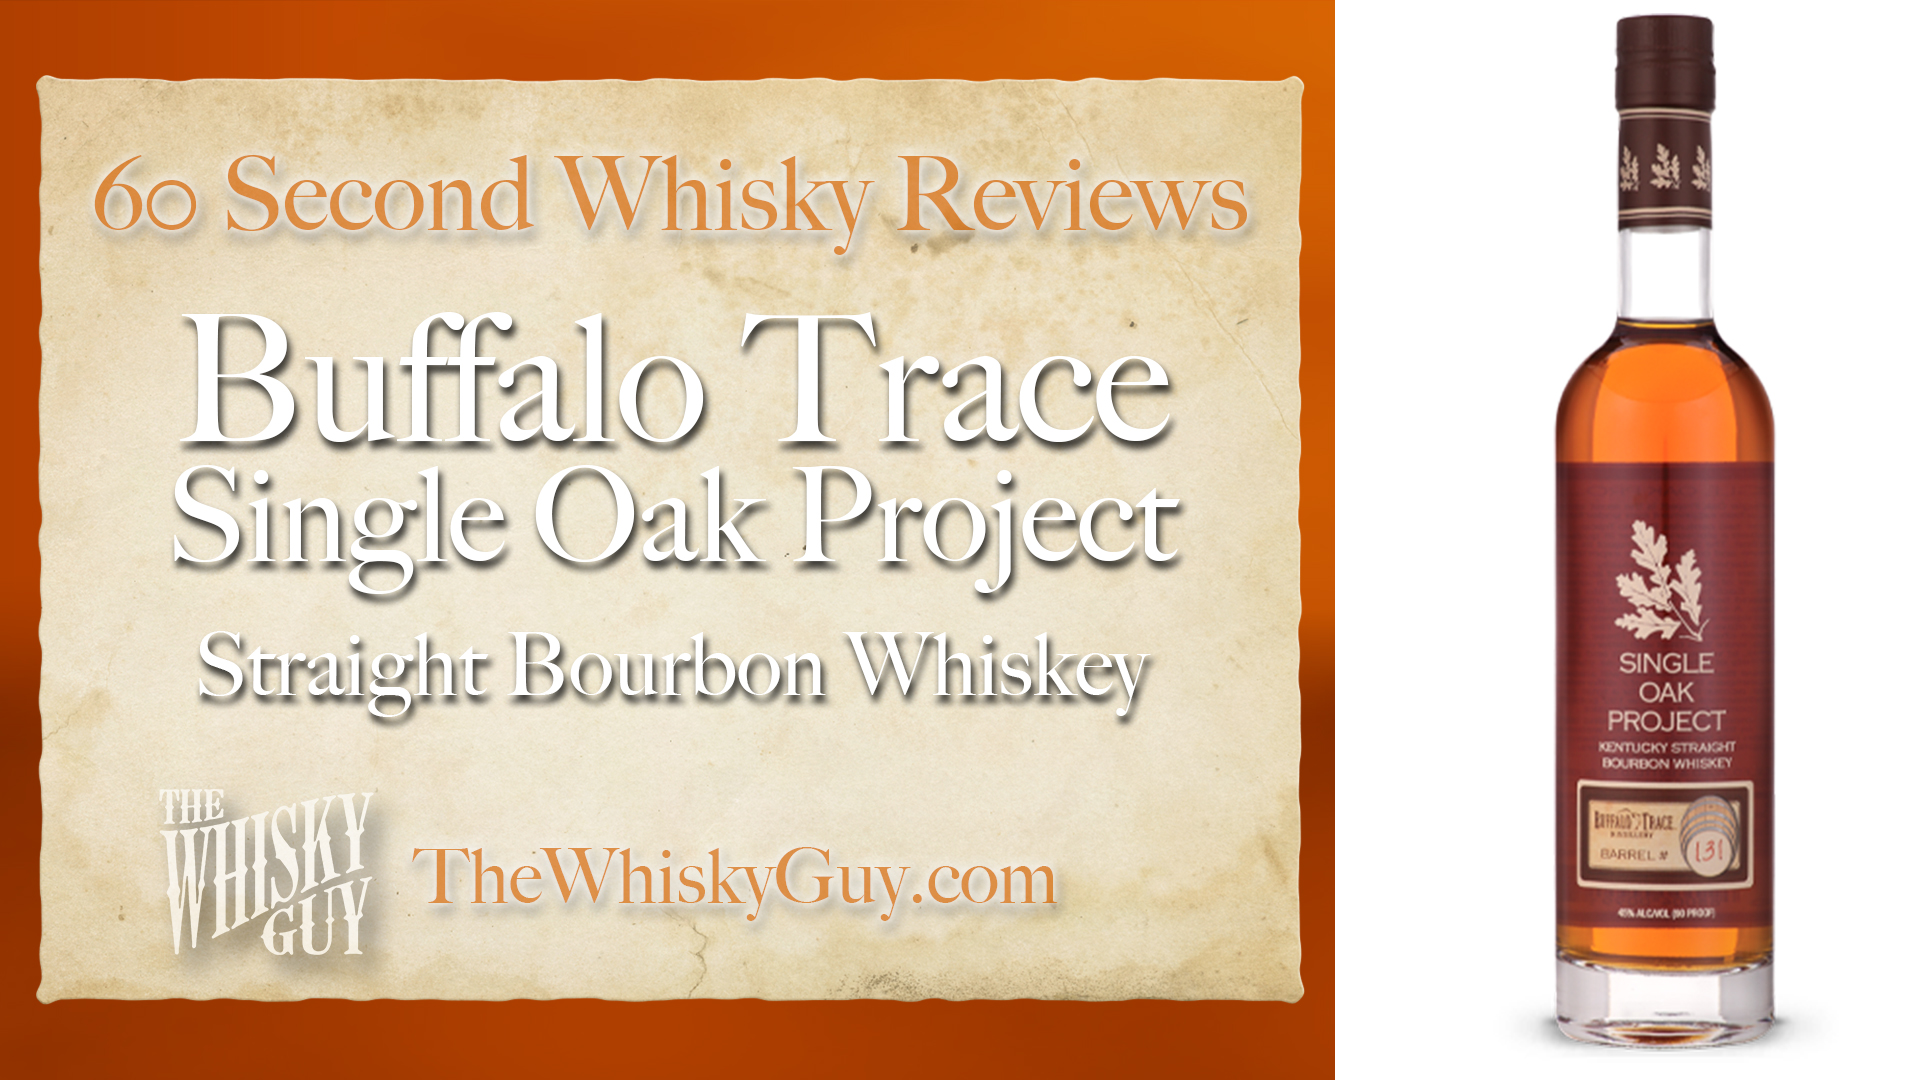 Does Buffalo Trace Single Oak Project Straight Bourbon Whiskey belong in your liquor cabinet? Is it worth the price at the bar? Give The Whisky Guy 60 seconds and find out! In just 60 seconds, The Whisky Guy reviews Irish Whiskey, Scotch Whisky, Single Malt, Canadian Whisky, Bourbon Whiskey, Japanese Whisky and other whiskies from around the world. Find more at TheWhiskyGuy.com. All original content © Ari Shapiro - TheWhiskyGuy.com